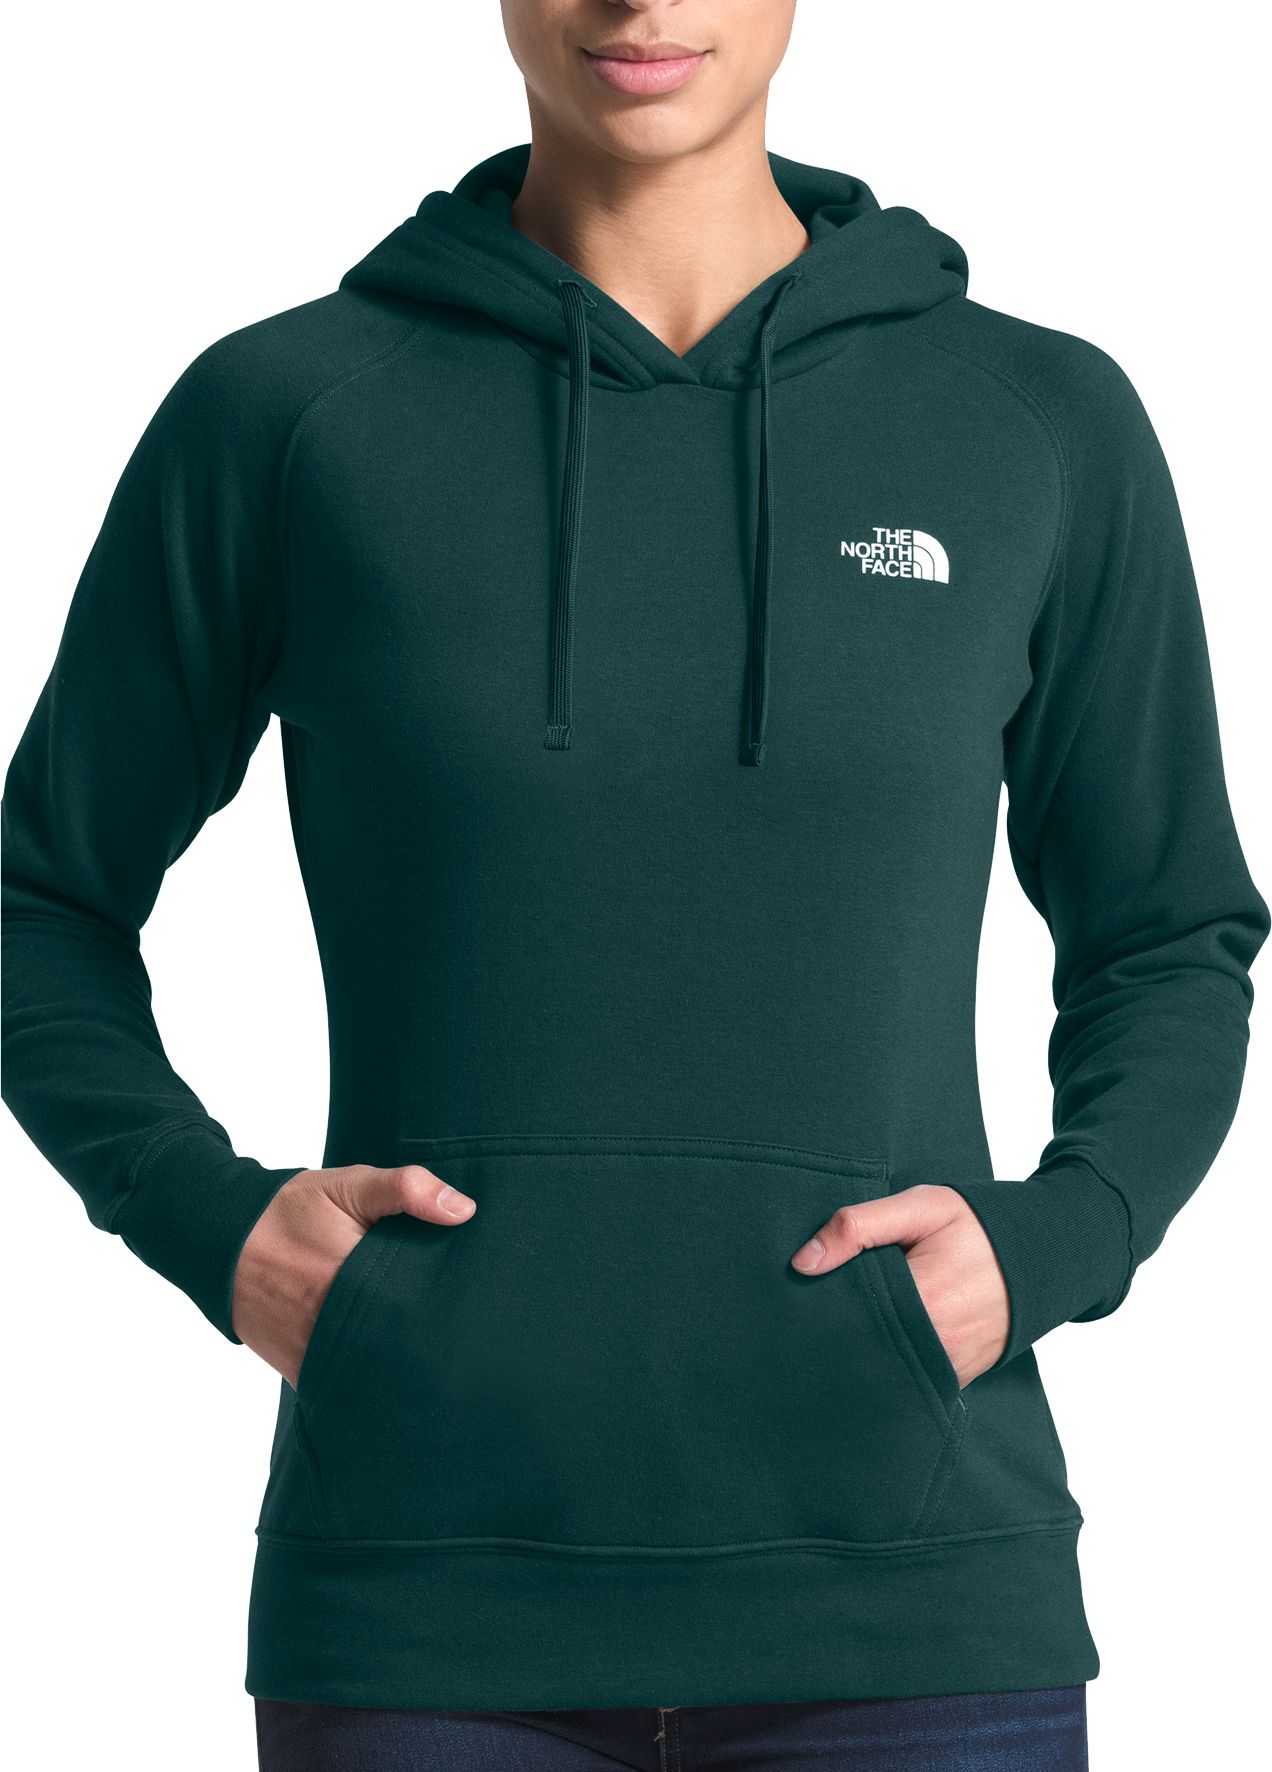 north face red box hoodie women's